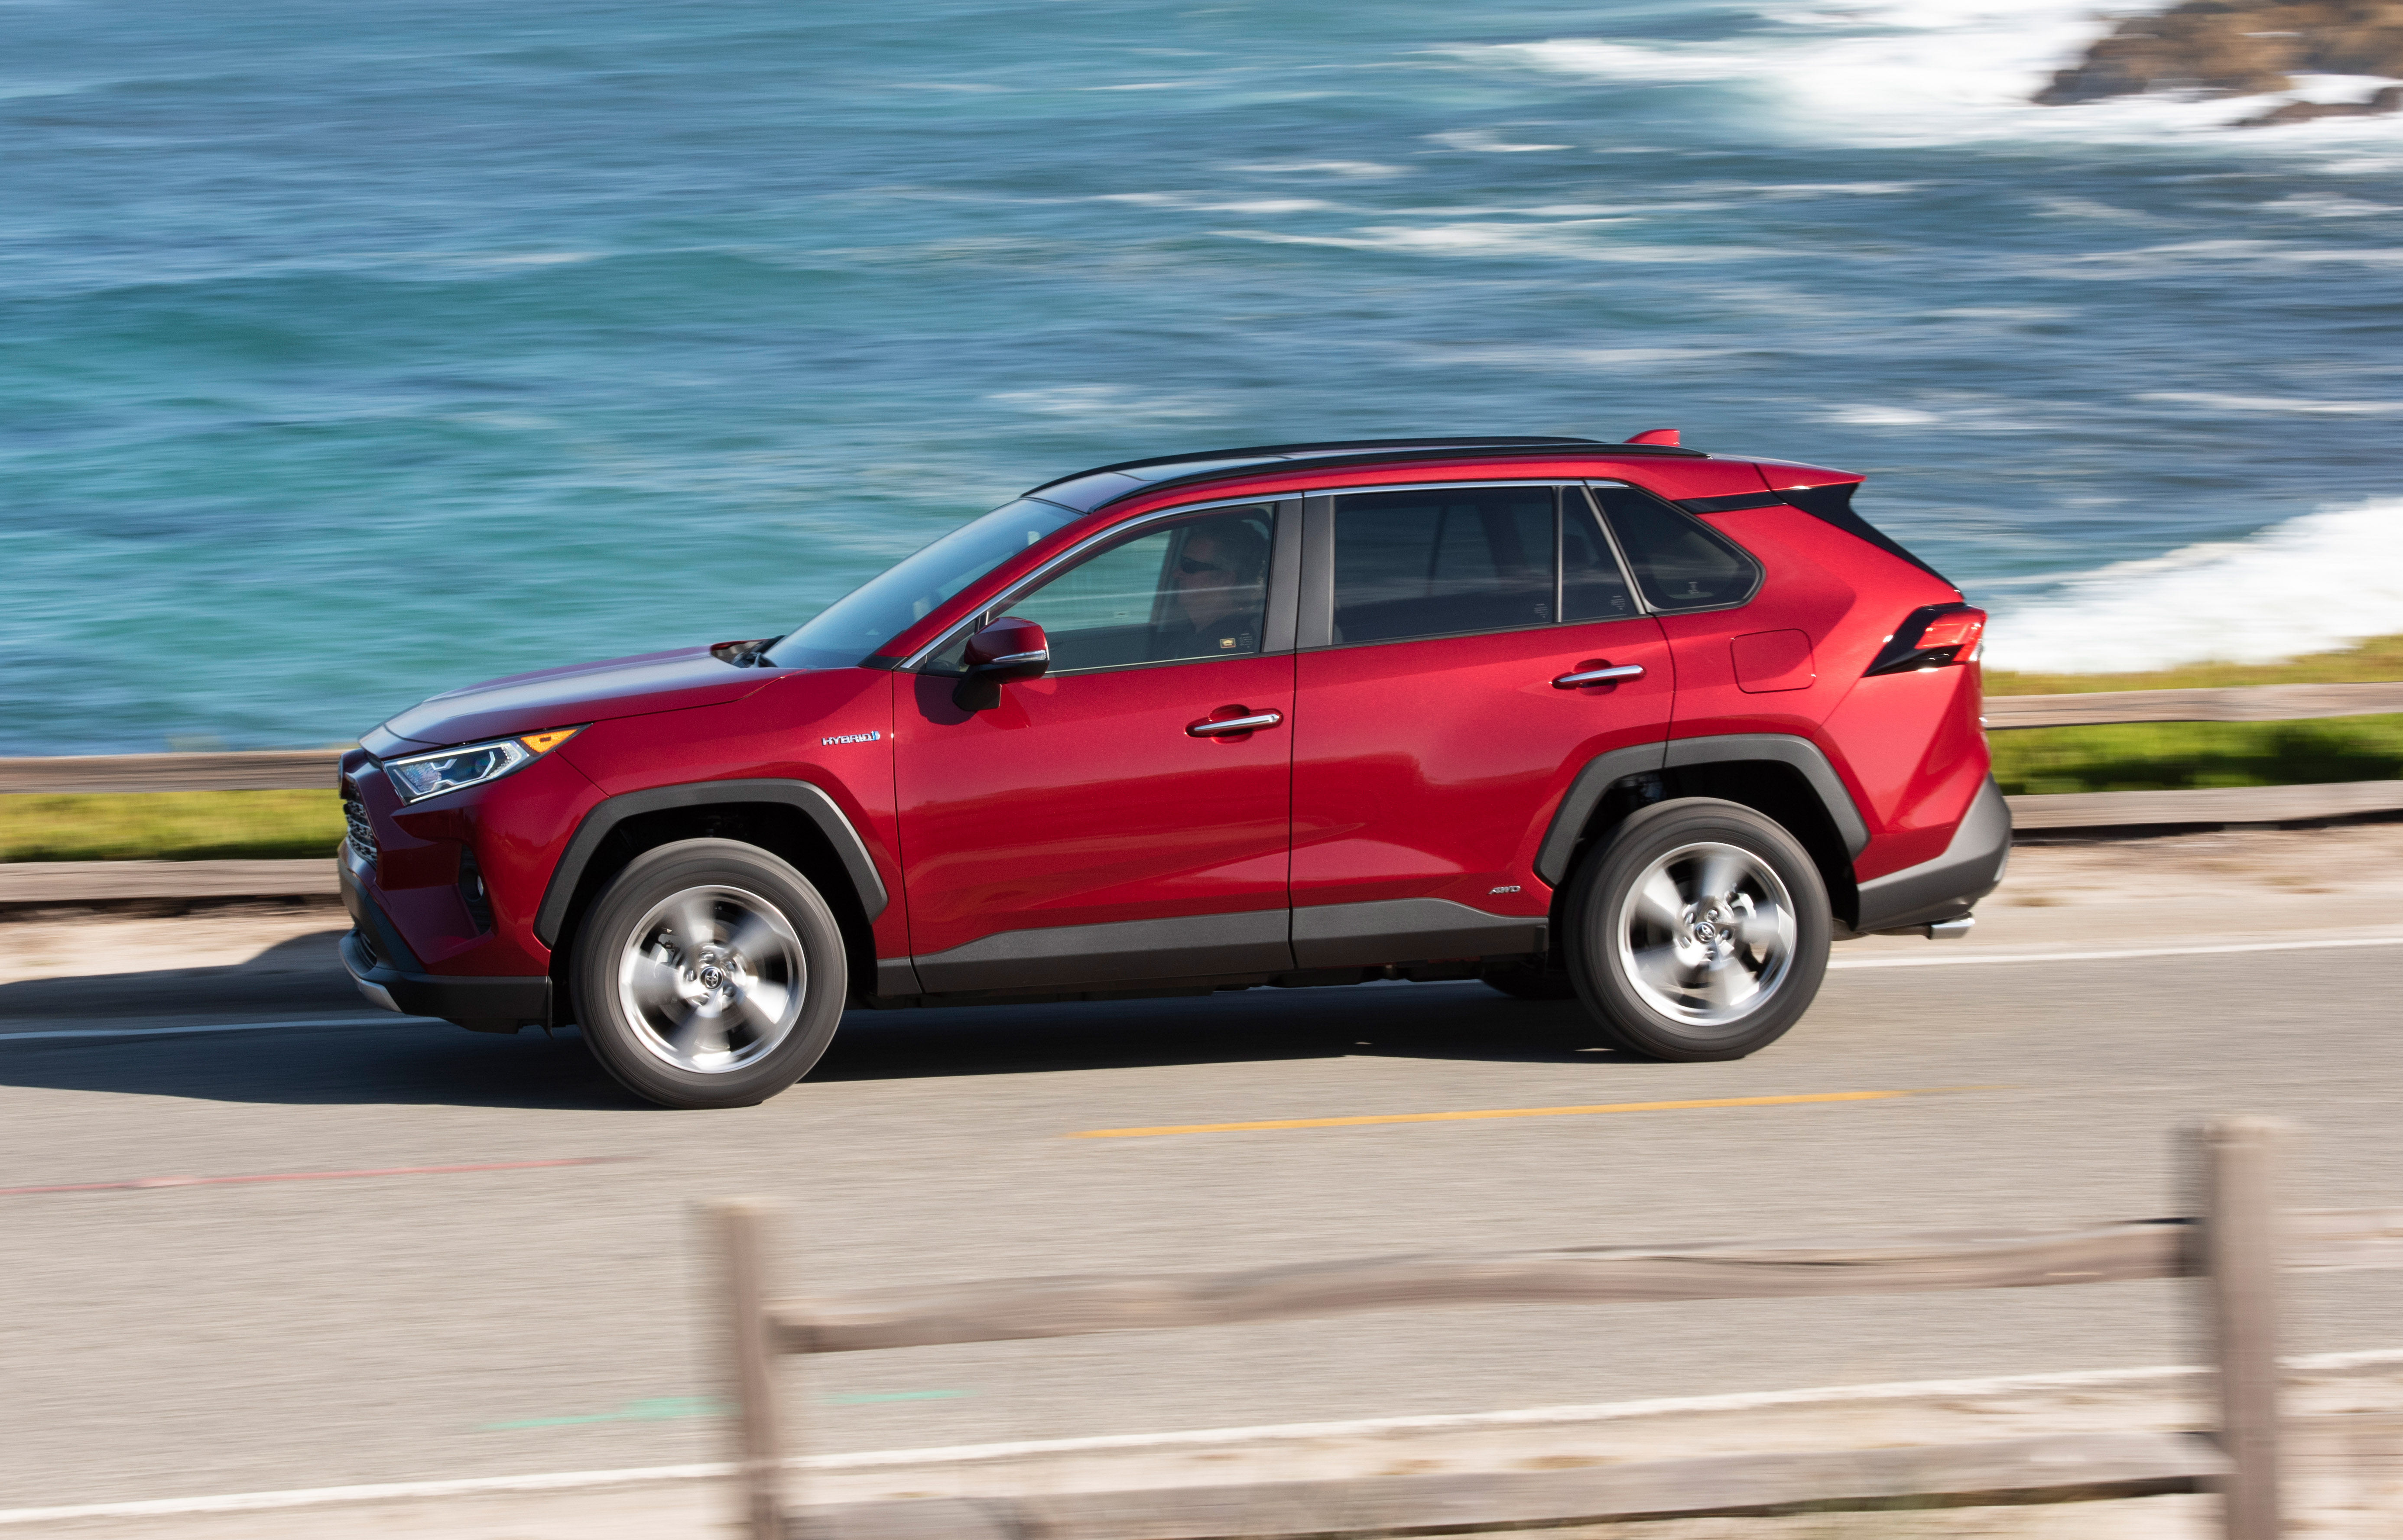 All-New 2019 Toyota RAV4 Aims for Continued Compact SUV Dominance